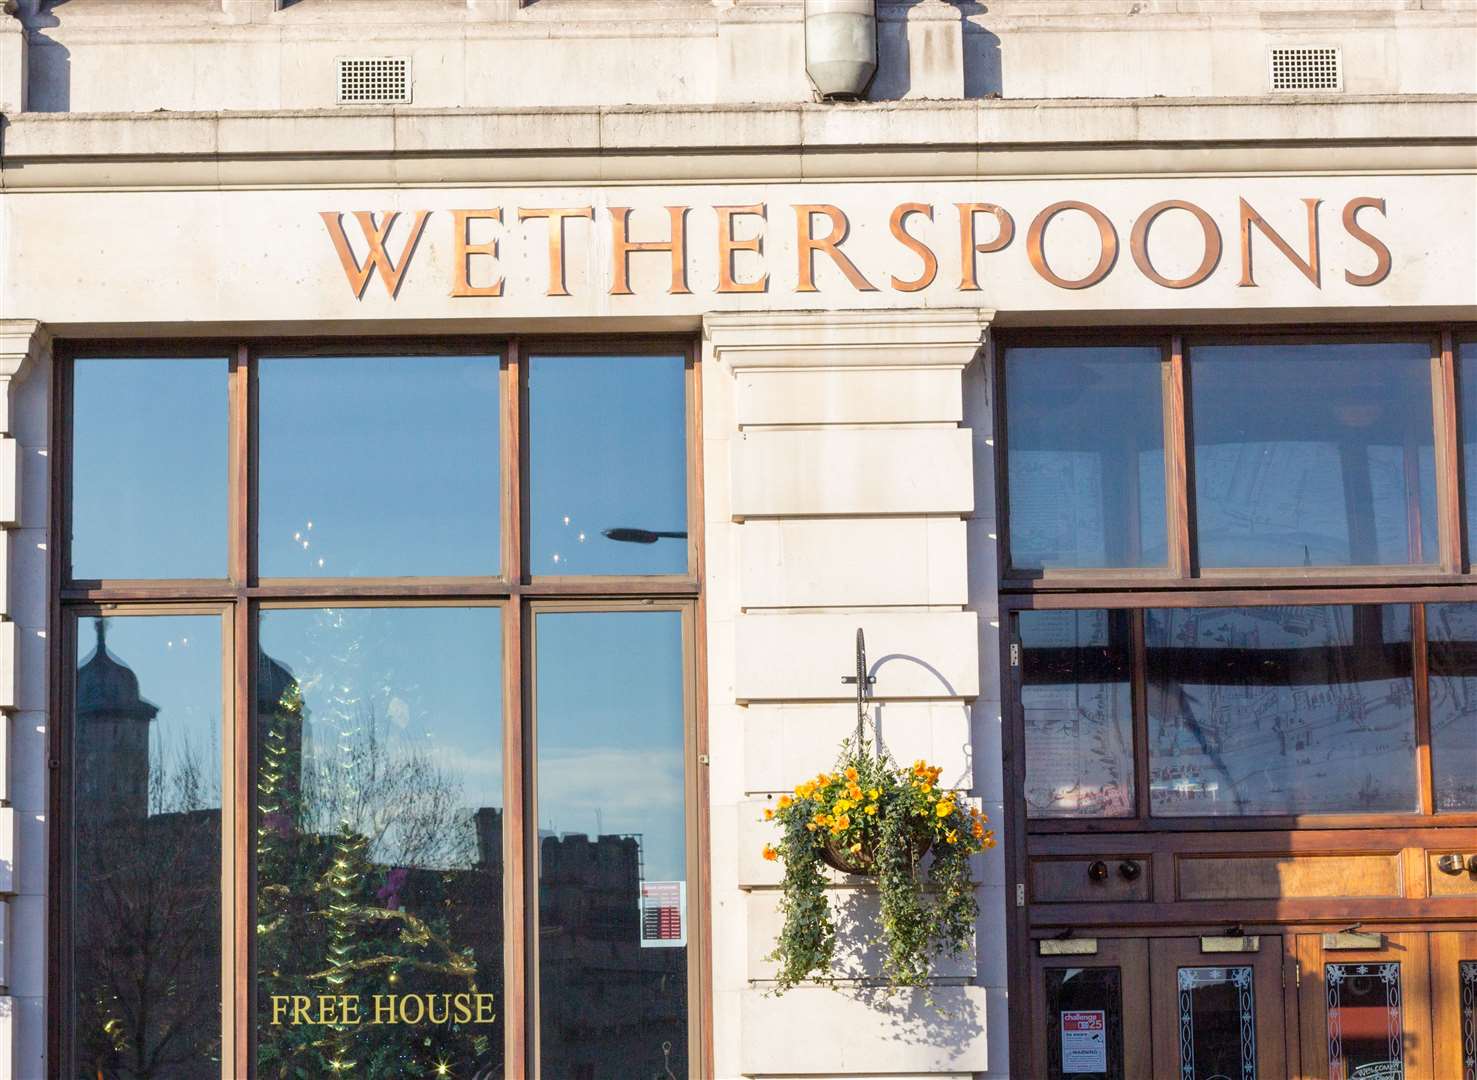 There are more than 800 Wetherspoons throughout the UK